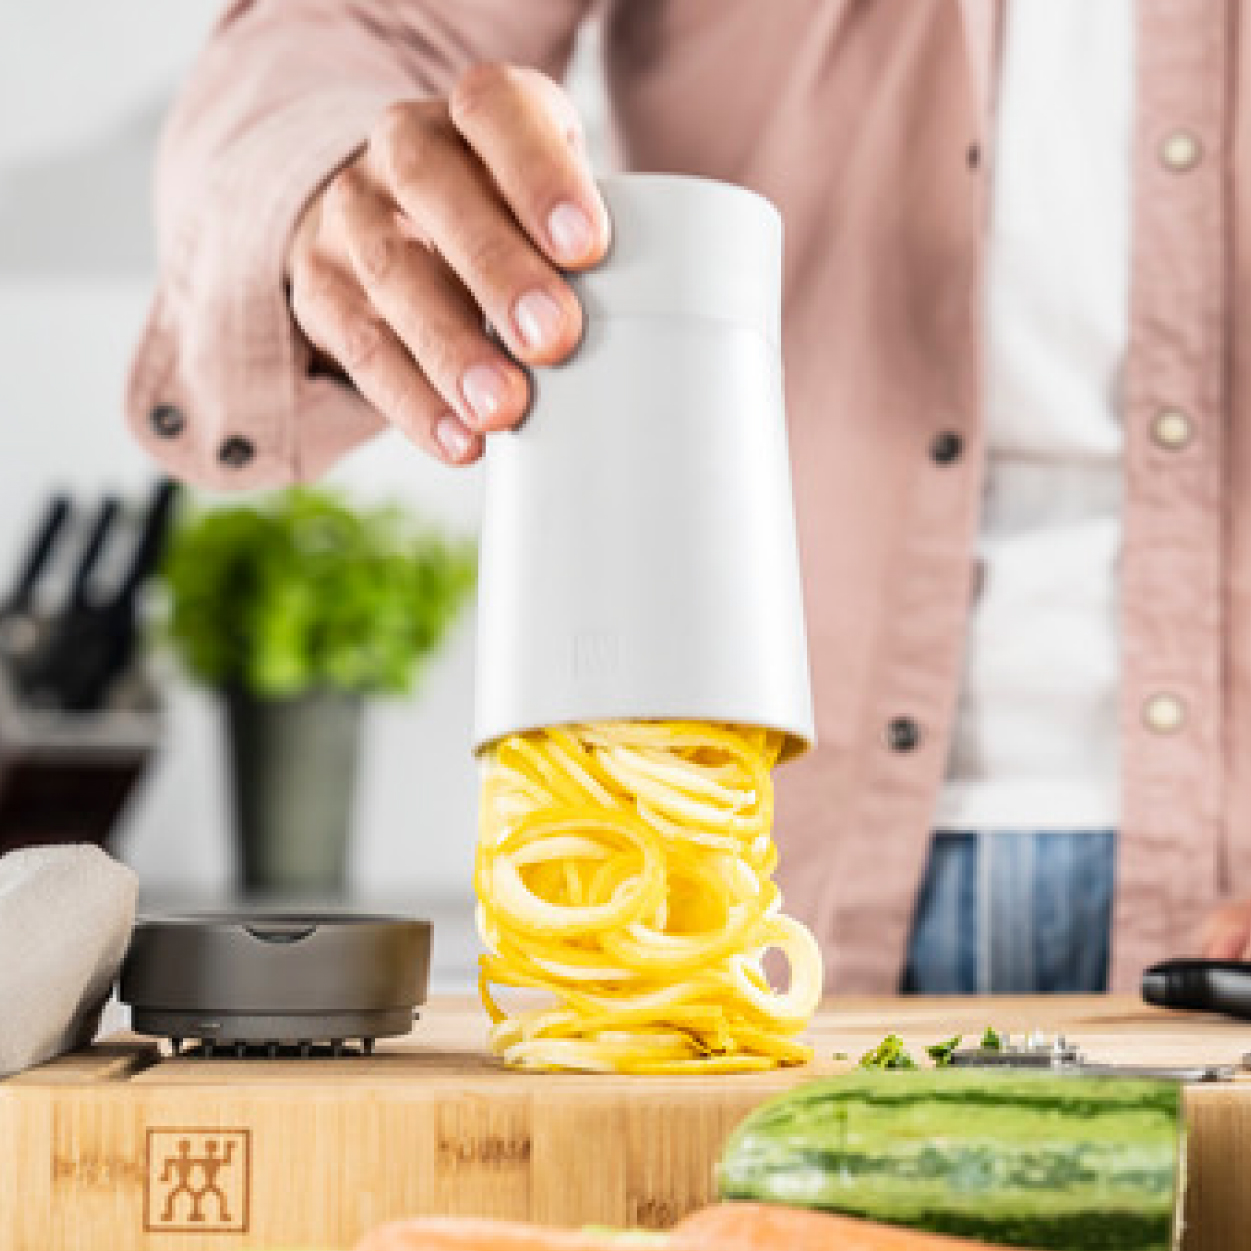 https://www.zwilling.com/on/demandware.static/-/Sites-zwilling-us-Library/default/dw93fe58bb/images/product-content/masonry-content/zwilling/tools-gadgets/z-cut/ZCut_MasonryFinal_Spiralizer3.jpg